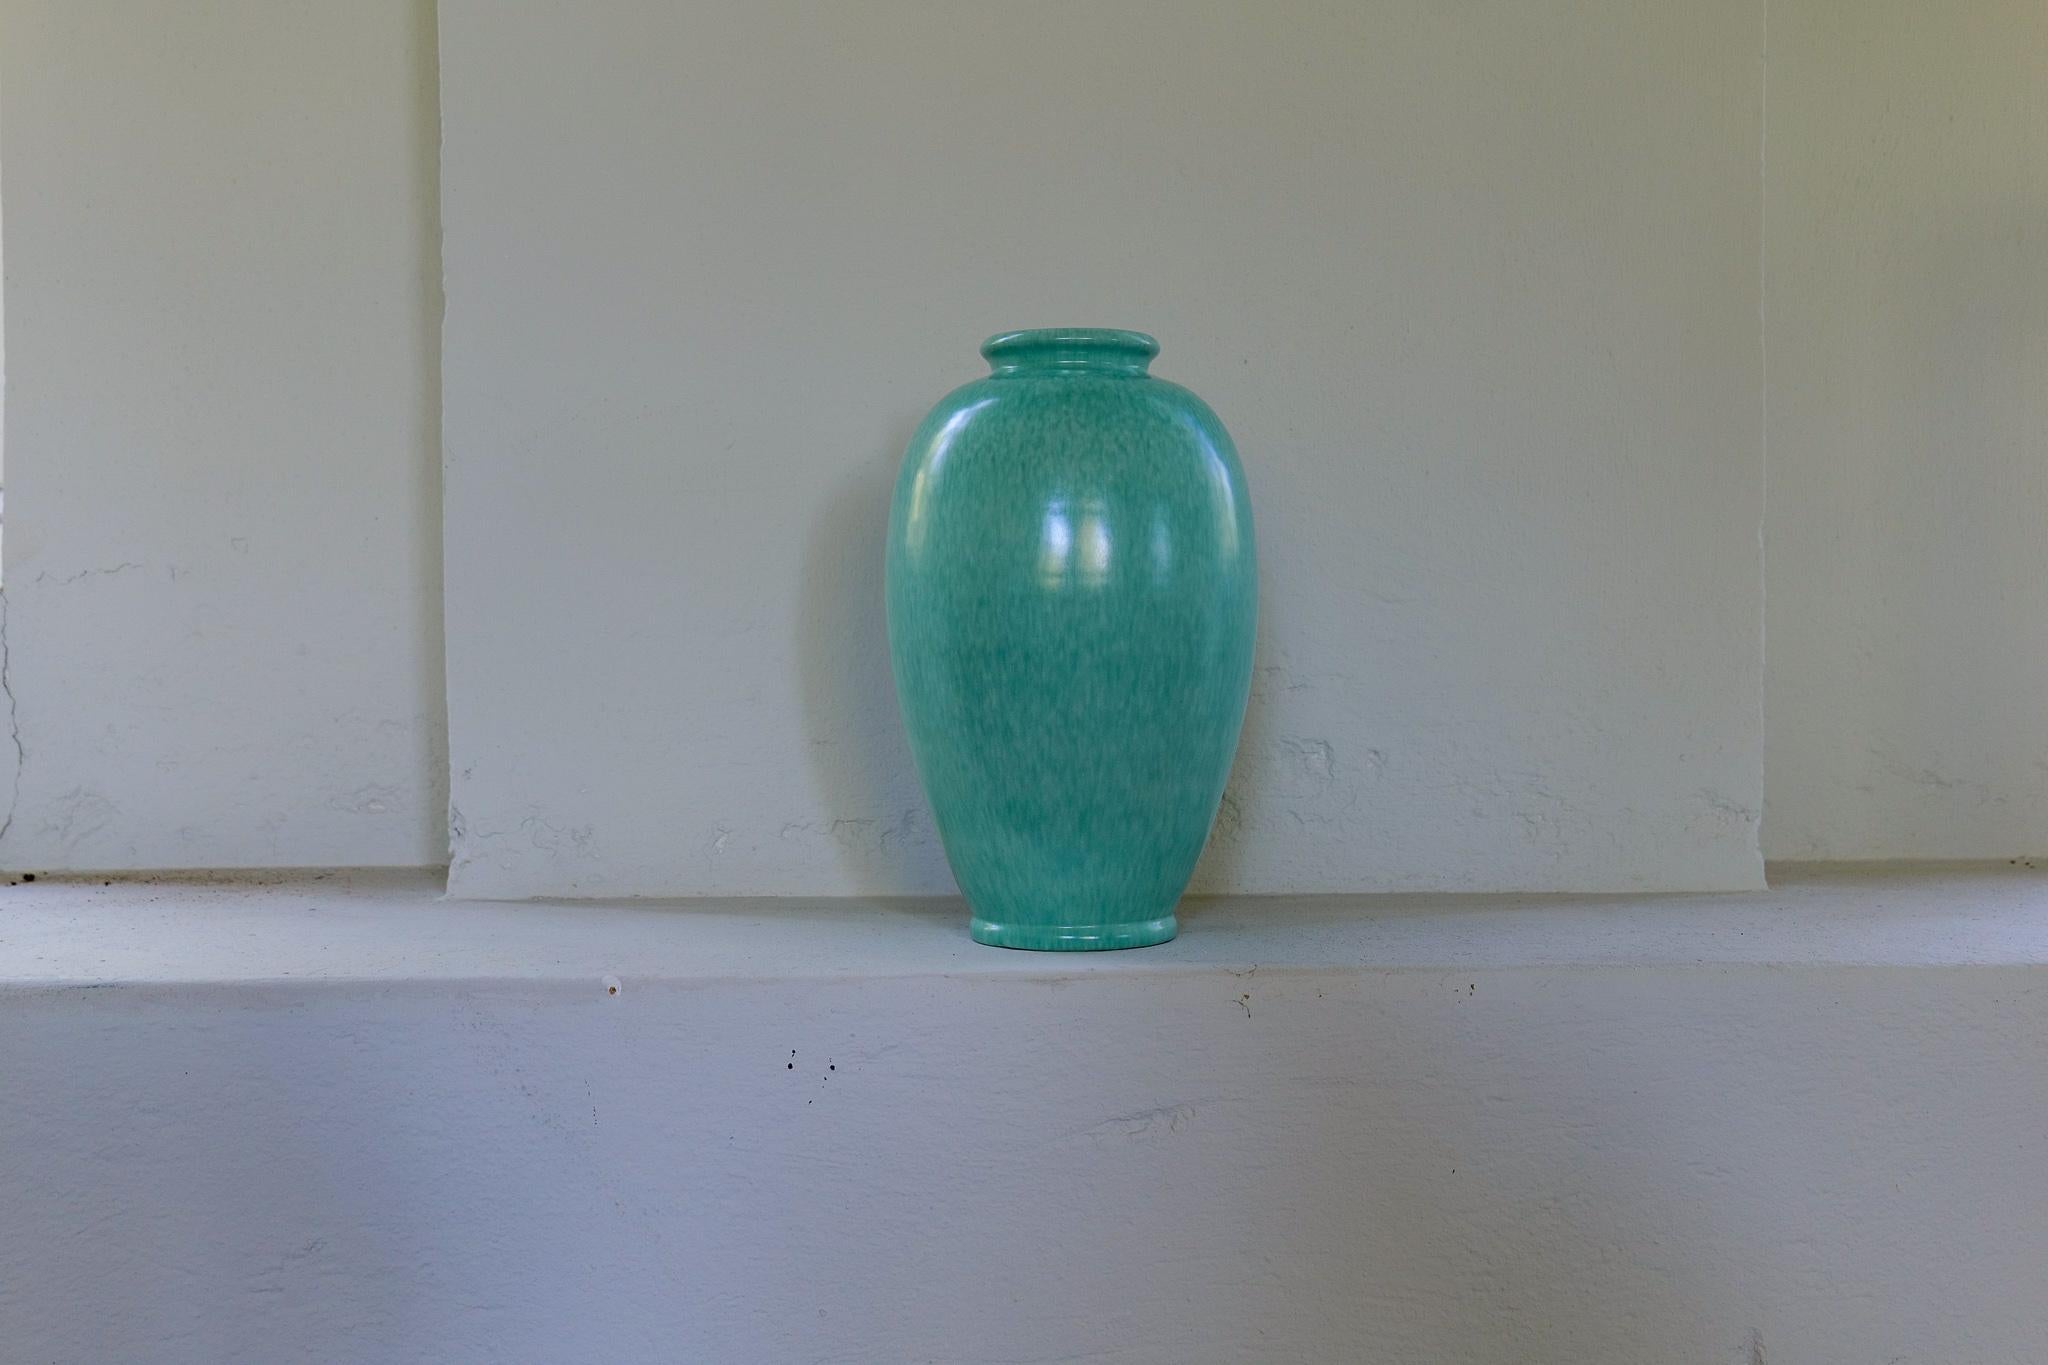 This wonderful, sculptured floor vase was created / designed by John Andersson for Höganäs Keramik Sweden 1960s.
The shape and the turquoise glaze are stunning. 

Good vintage condition. 

Dimensions: height 40 cm middle part diameter 22 cm top